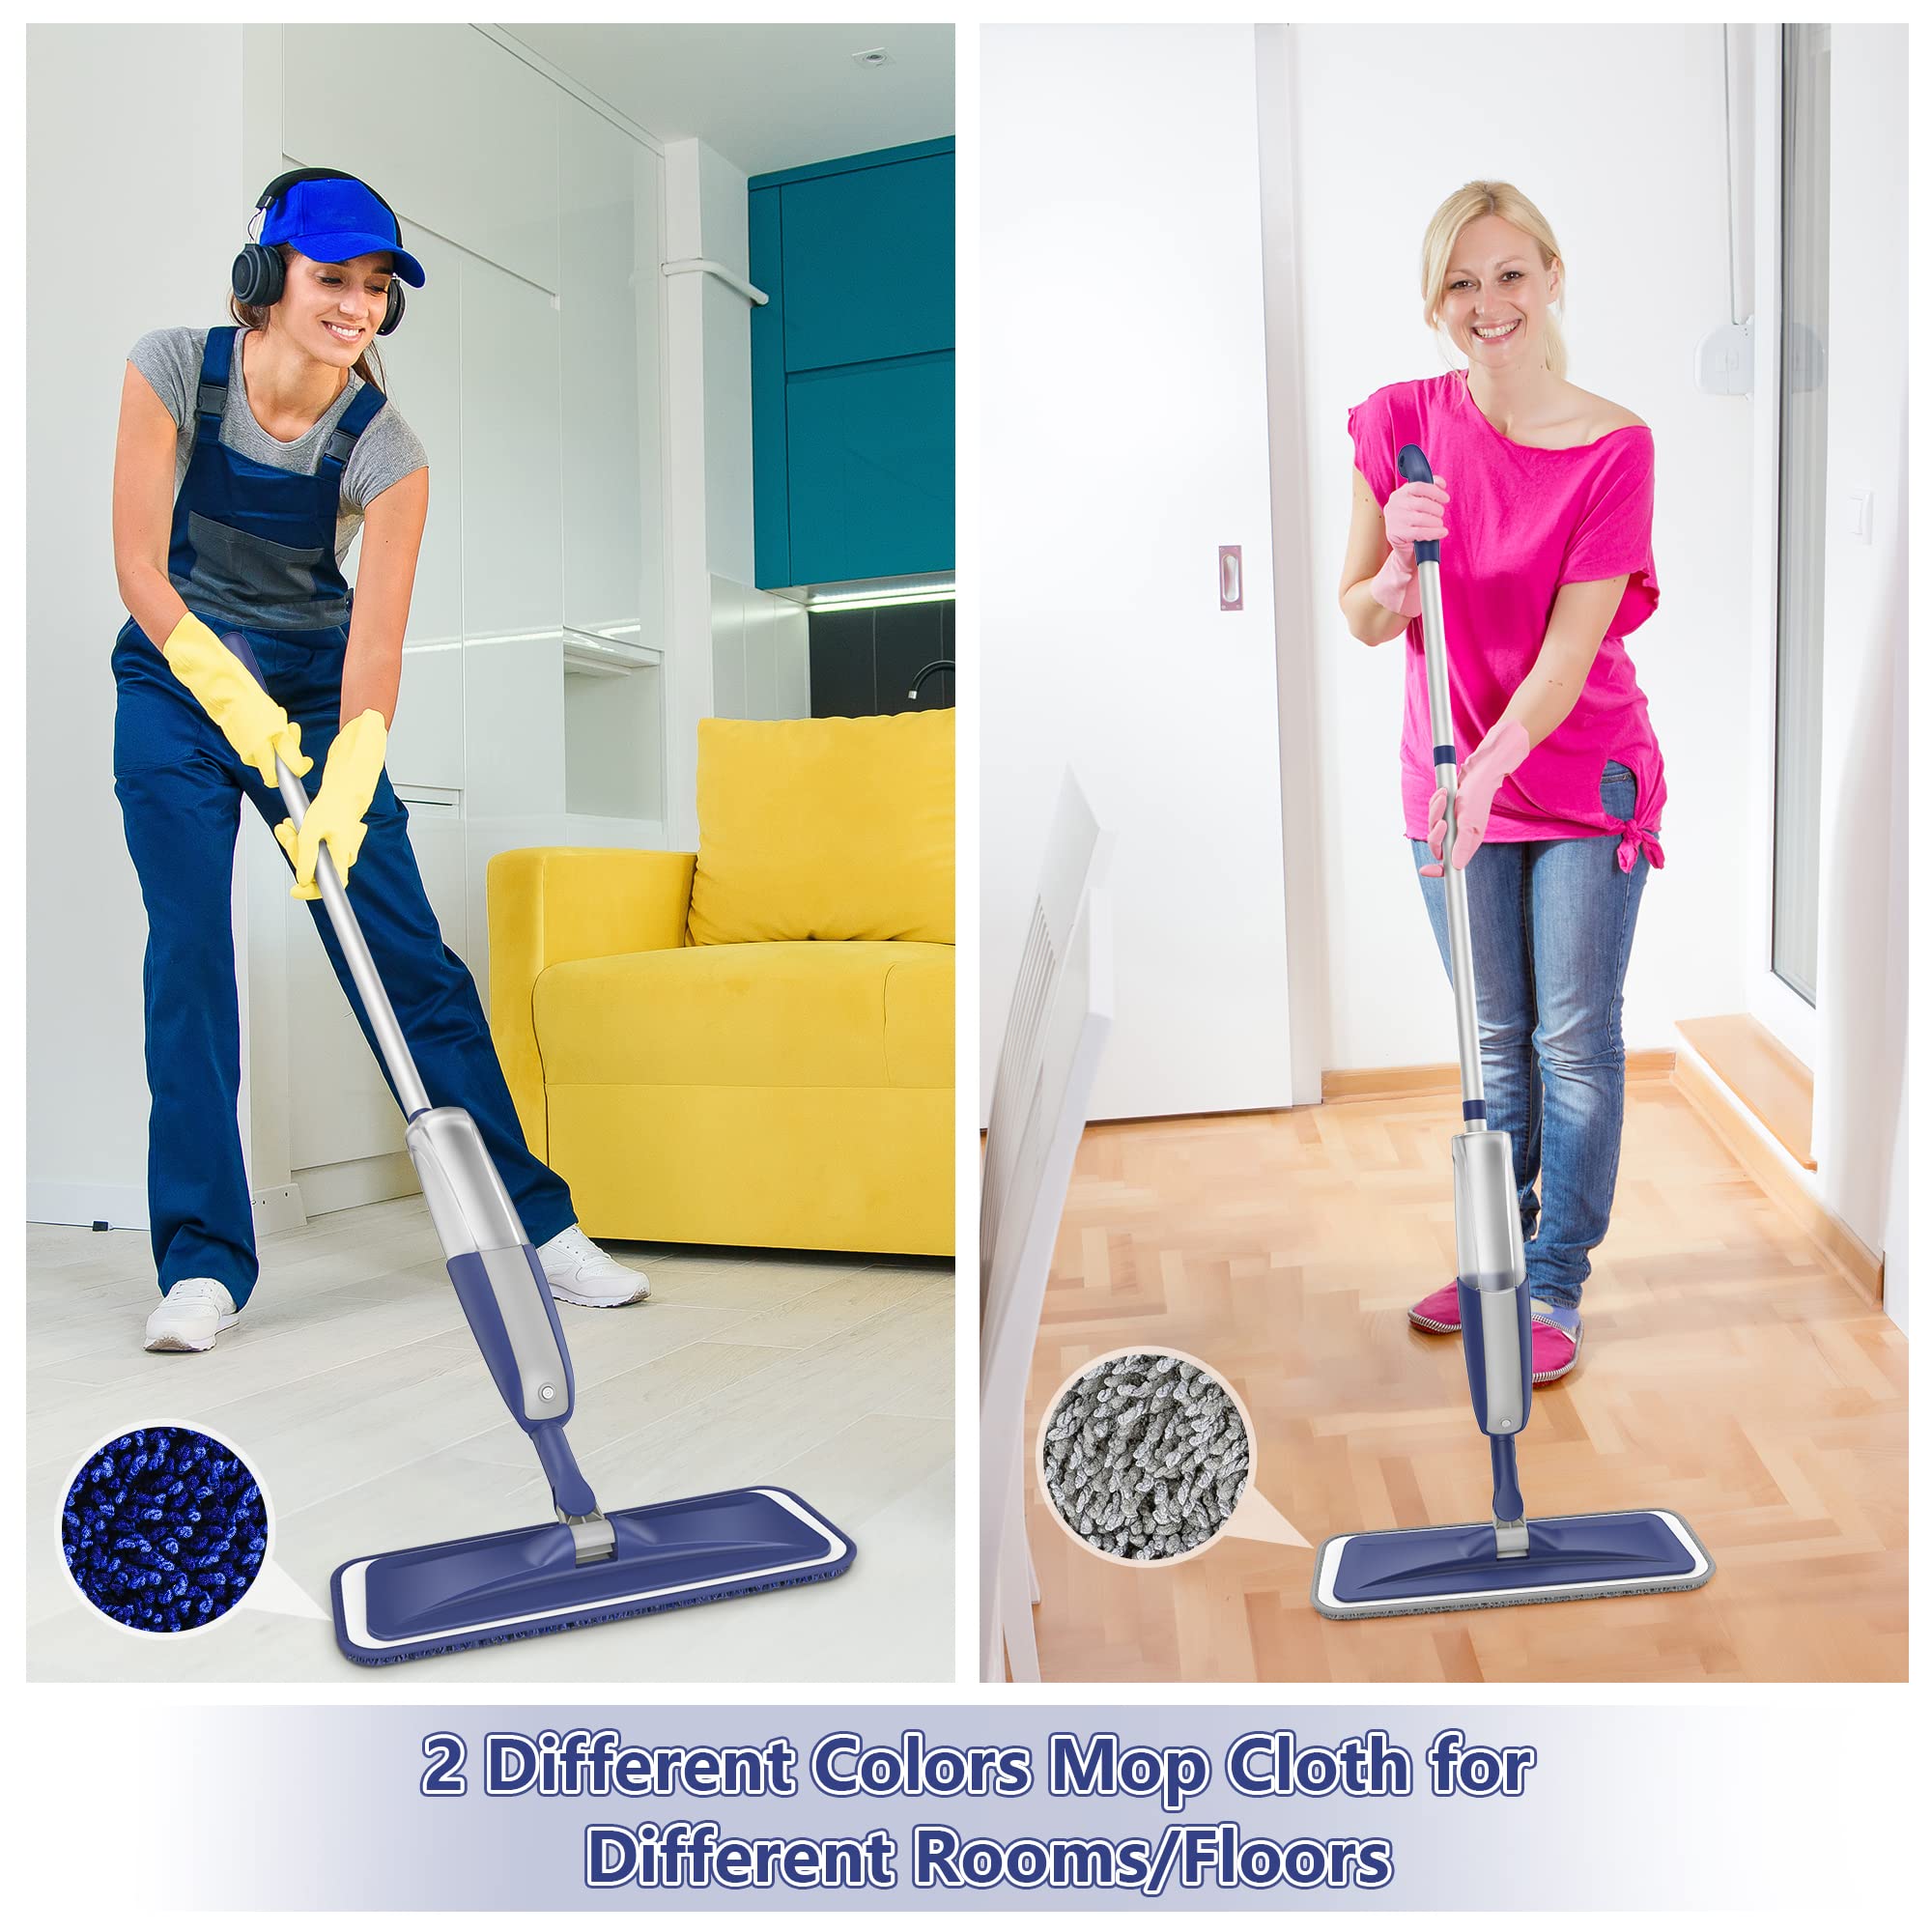 Wet Dust Mops for Floor Cleaning - MEXERRIS Microfiber Spray Mops 4X Reusable Mop Pads 2X Bottles Wood Floor Mop with Spray Dry Mops Flat Mop for Home Commercial Use Hardwood Laminate Tiles Floors